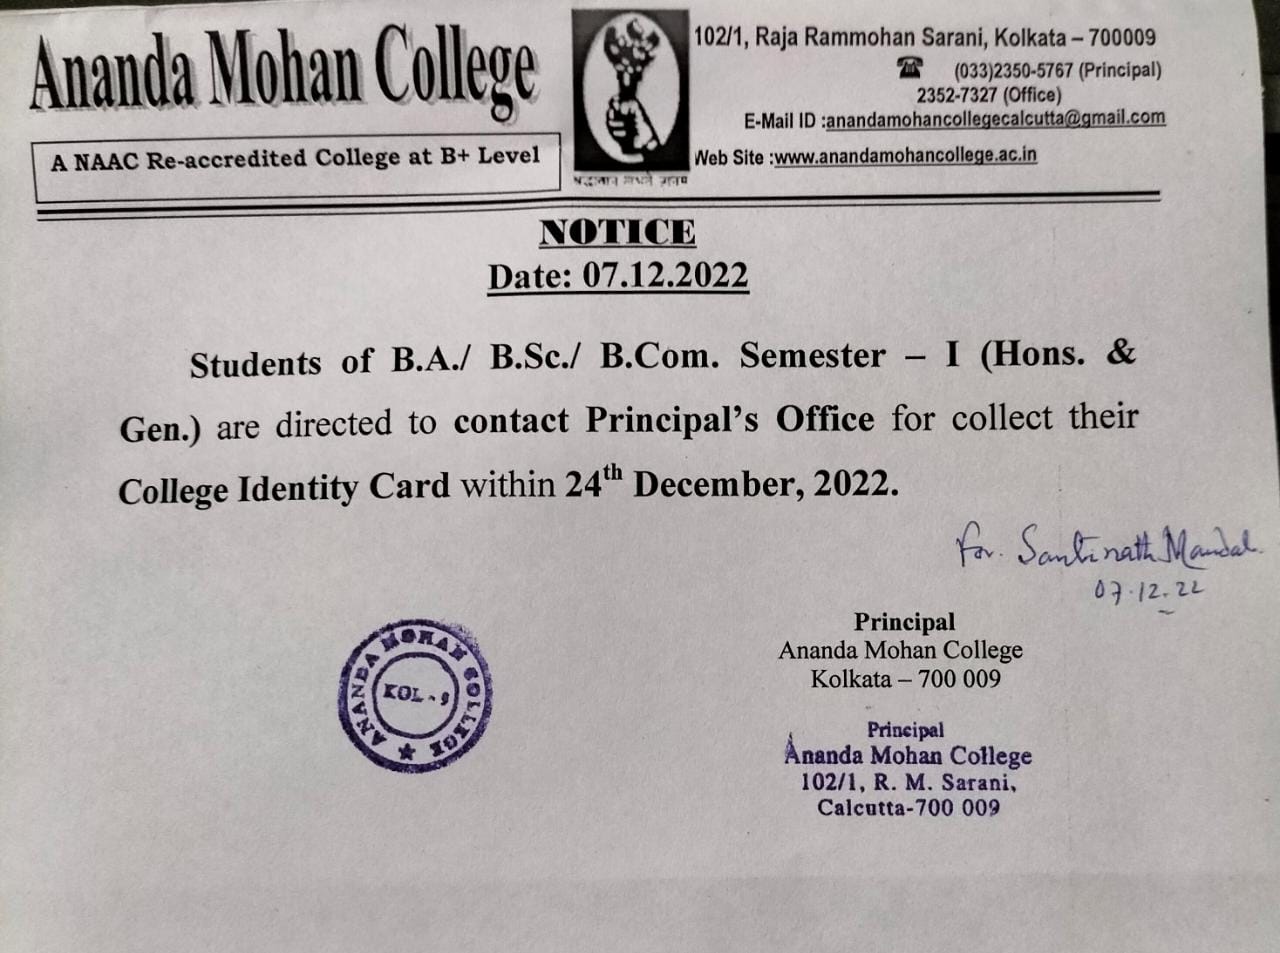 College Identity Card for Semester-I Students - Ananda Mohan College